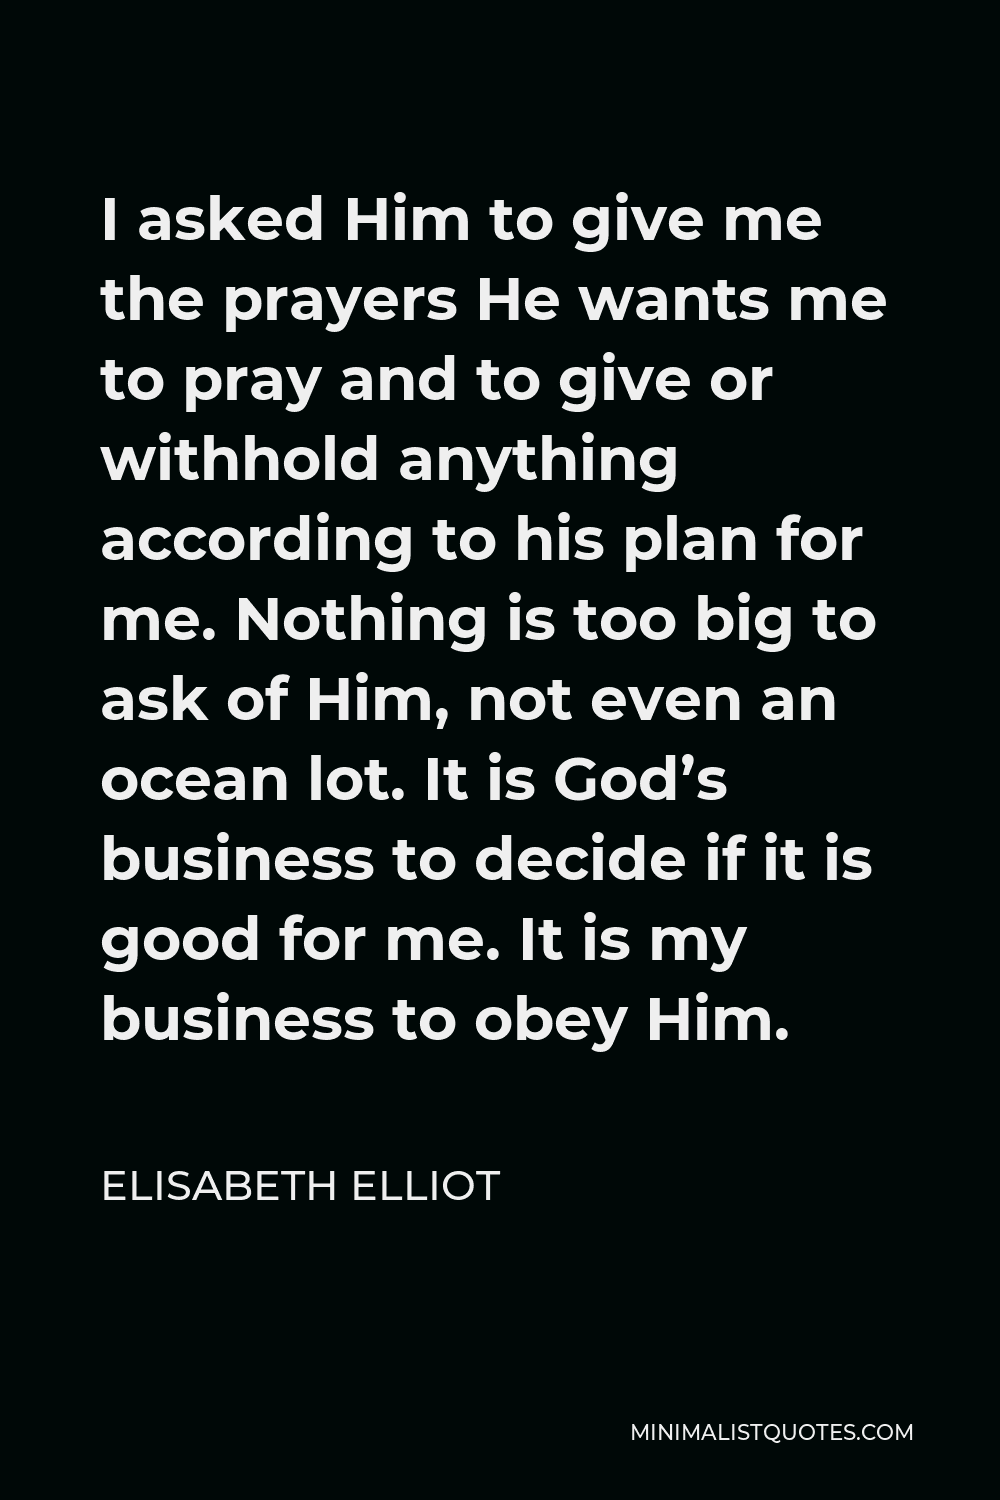 Elisabeth Elliot Quote - I asked Him to give me the prayers He wants me to pray and to give or withhold anything according to his plan for me. Nothing is too big to ask of Him, not even an ocean lot. It is God’s business to decide if it is good for me. It is my business to obey Him.